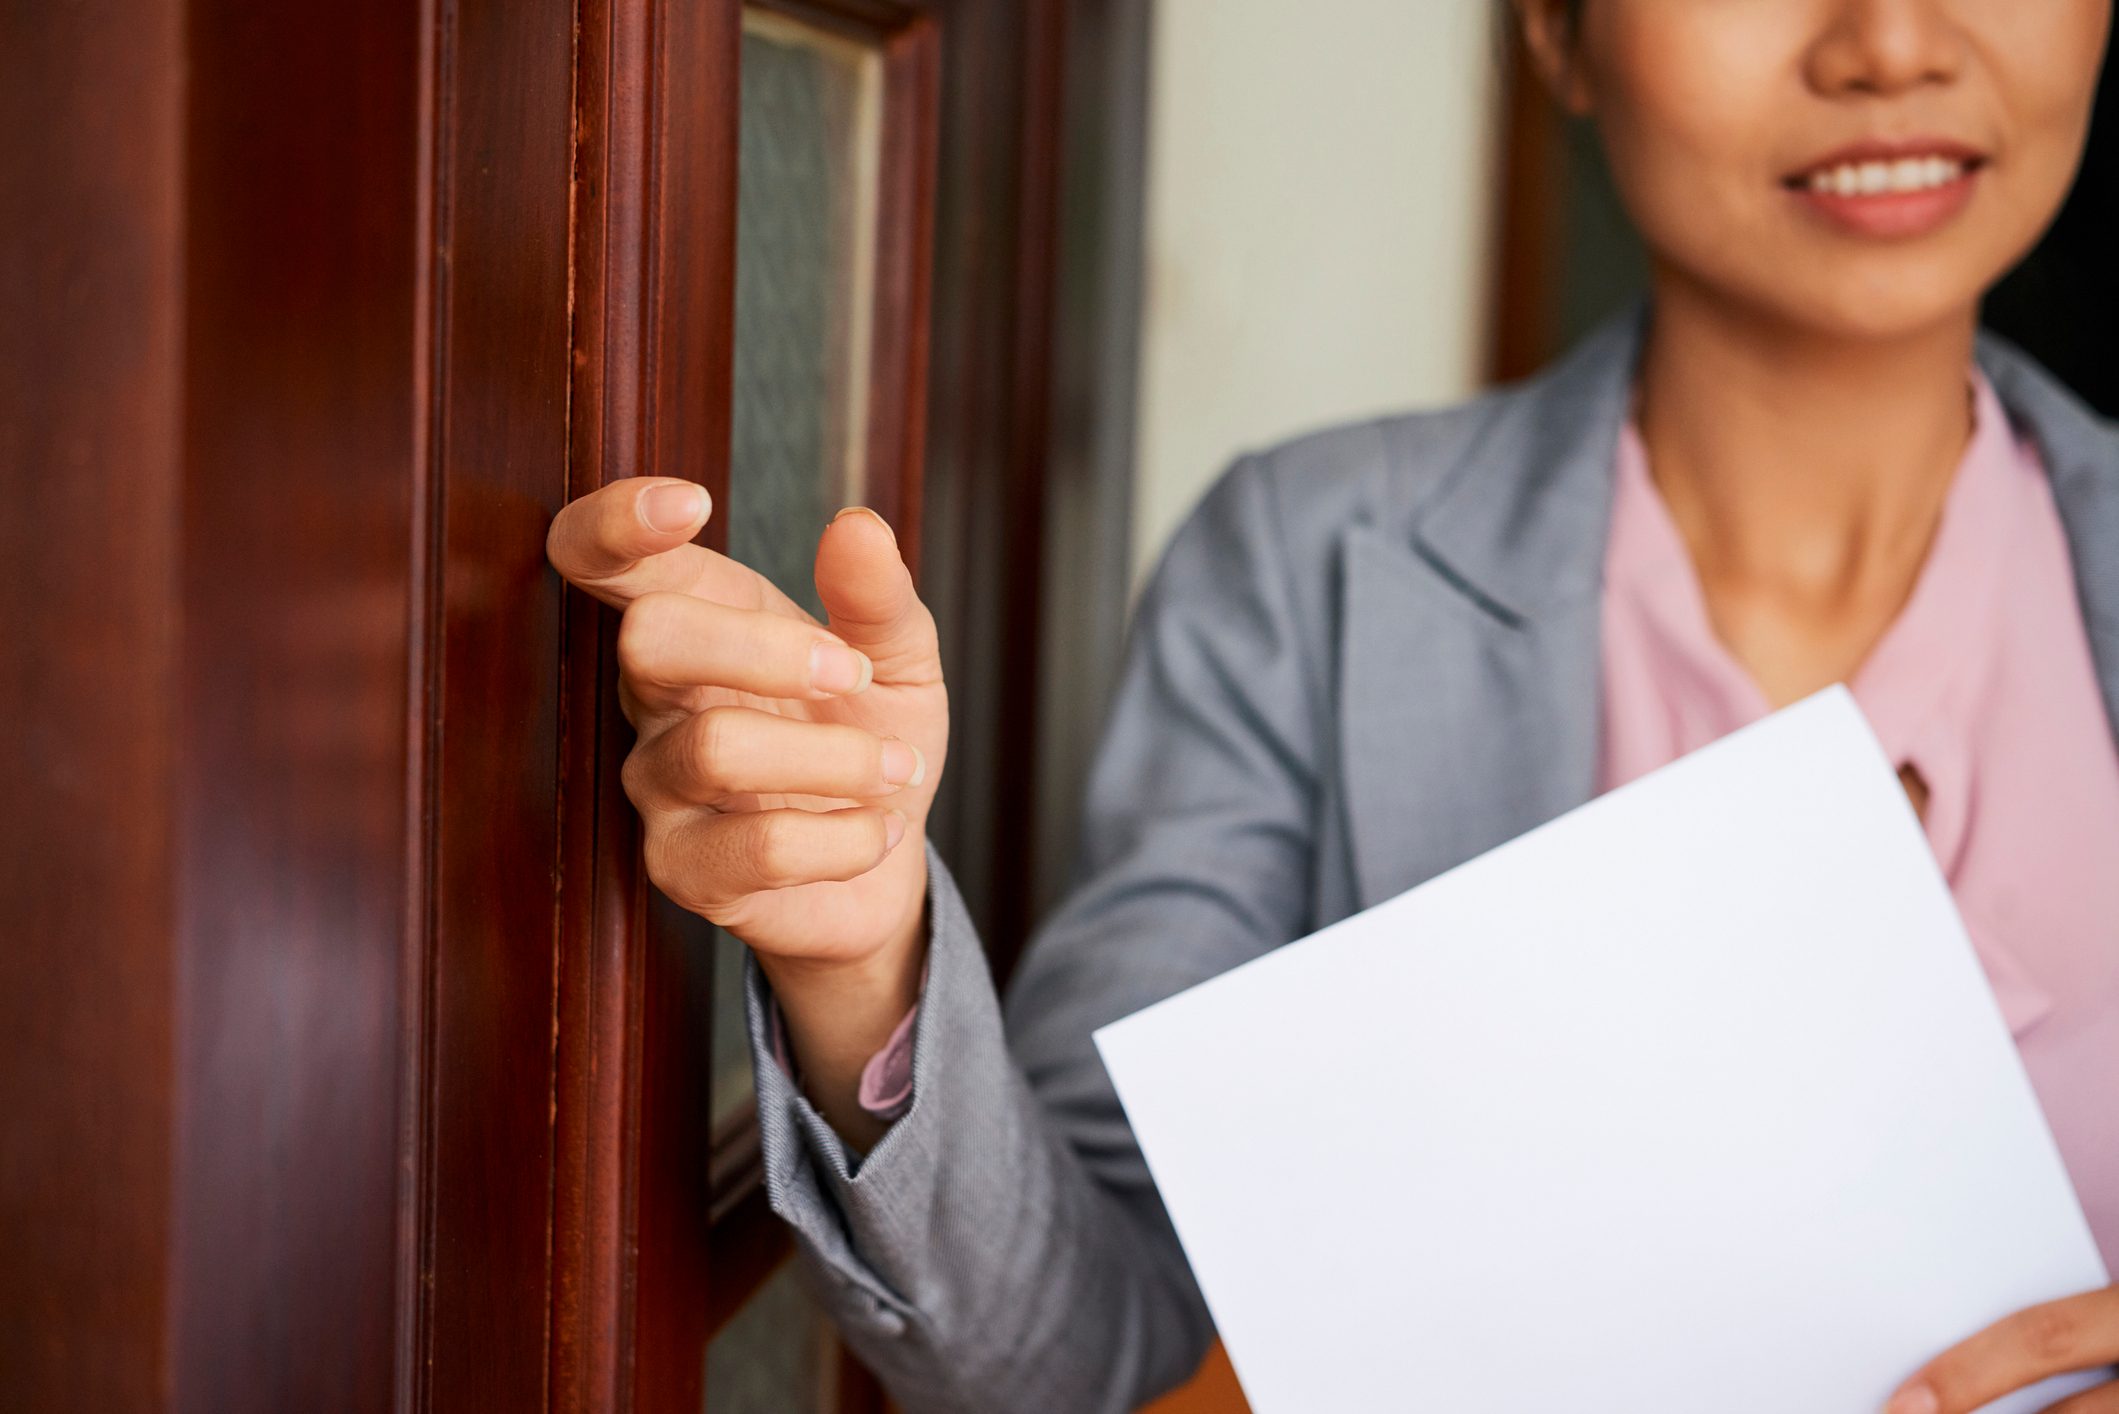 <p>There's a popular <a href="https://www.rd.com/list/the-10-worst-mistakes-of-first-time-job-hunters/">job-hunting "tip</a>" that makes the rounds every few years, telling people it's better to deliver your résumé in person. According to the tip, this allows the hiring manager to put a face to the name and shows initiative. This is not a good idea, and chances are you won't make it past the front desk anyhow. Similarly, don't call the hiring manager directly unless told to. Hiring managers are very busy, and anything you do that goes outside our hiring protocols is going to be unhelpful at best—and at worst, it will get your résumé dropped straight in the trash.</p> <p><strong>What to do instead:</strong> Follow the hiring protocols and process outlined by the company or the recruiter. I know it can feel tedious, but showing us you can read, understand and follow the rules makes a good first impression. If you're working with a talent-acquisition company (like a headhunter), then ask them lots of questions. This is what they're there for, and they should know all the ins and outs of the hiring process for that specific job.</p>